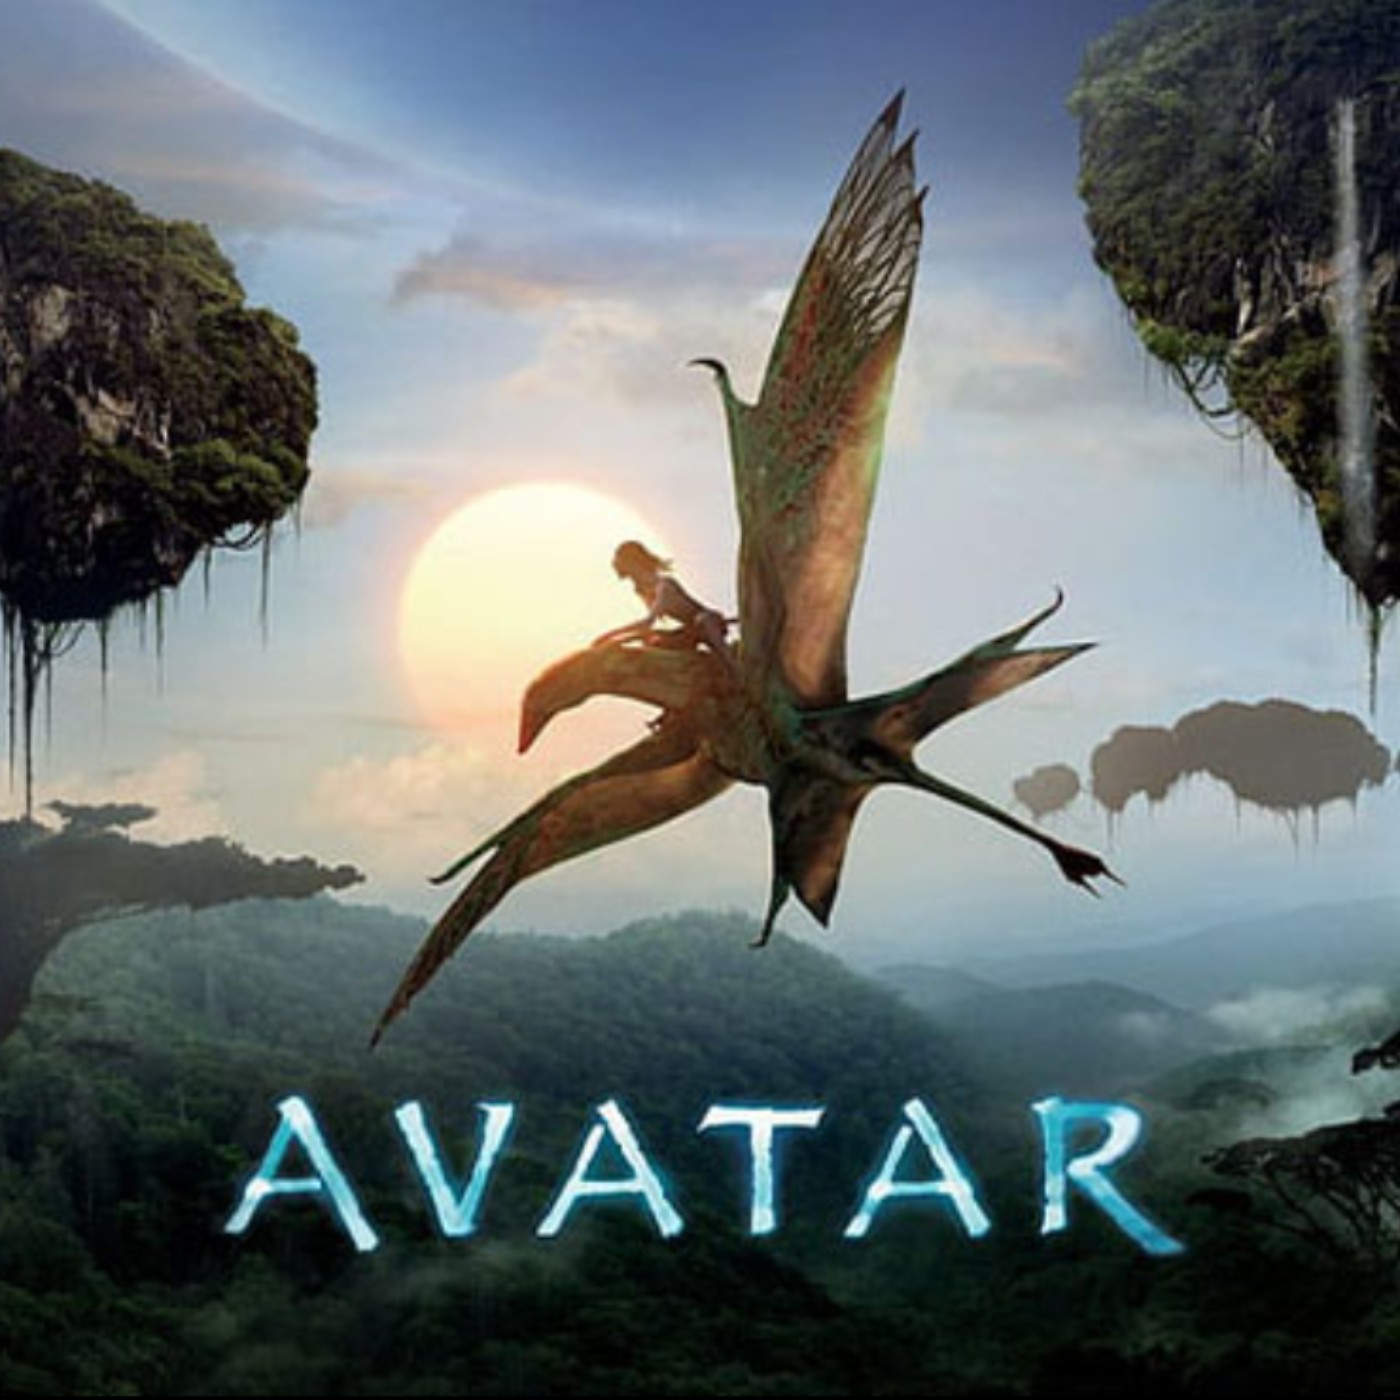 Avatar 2 The Way of Water (2022) FullMovie Online free on 123Movies  **Avatar 2 The Way of Water (2022) FullMovie Online free on 123Movies |  Podcast on SoundOn